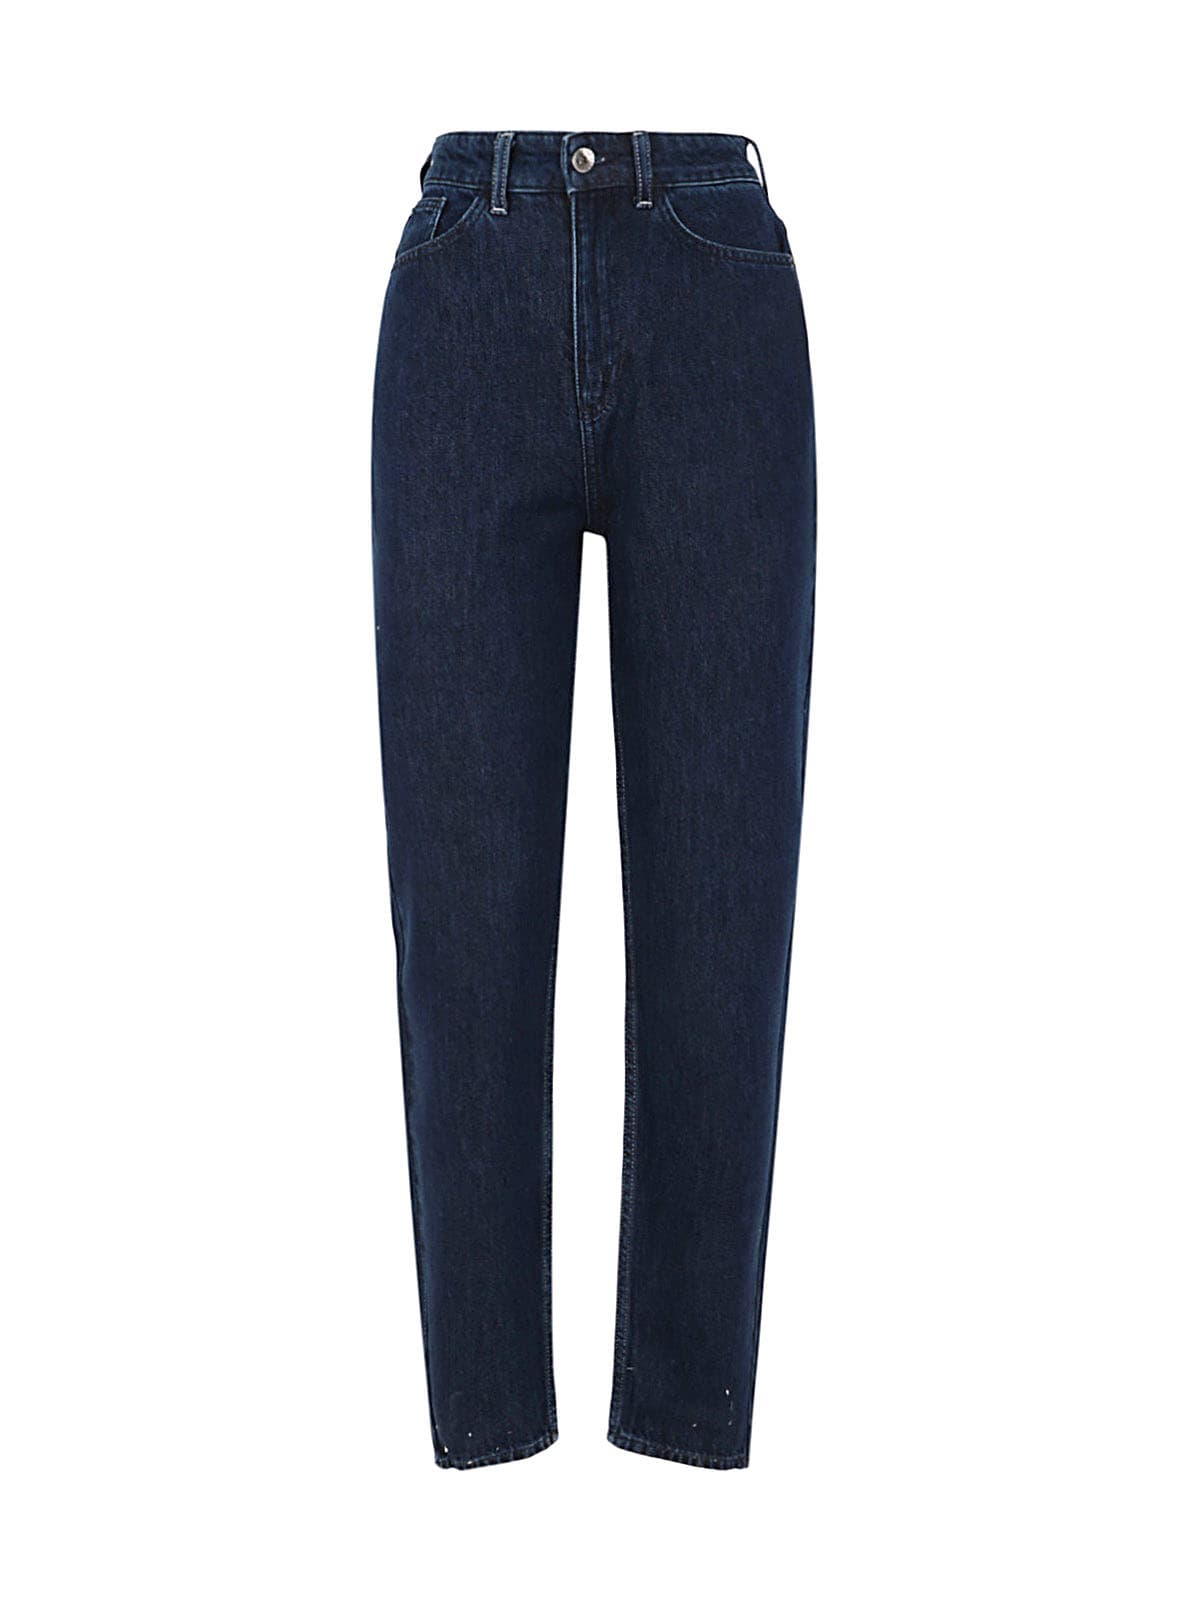 Emporio Armani High Wasted Carot Jeans